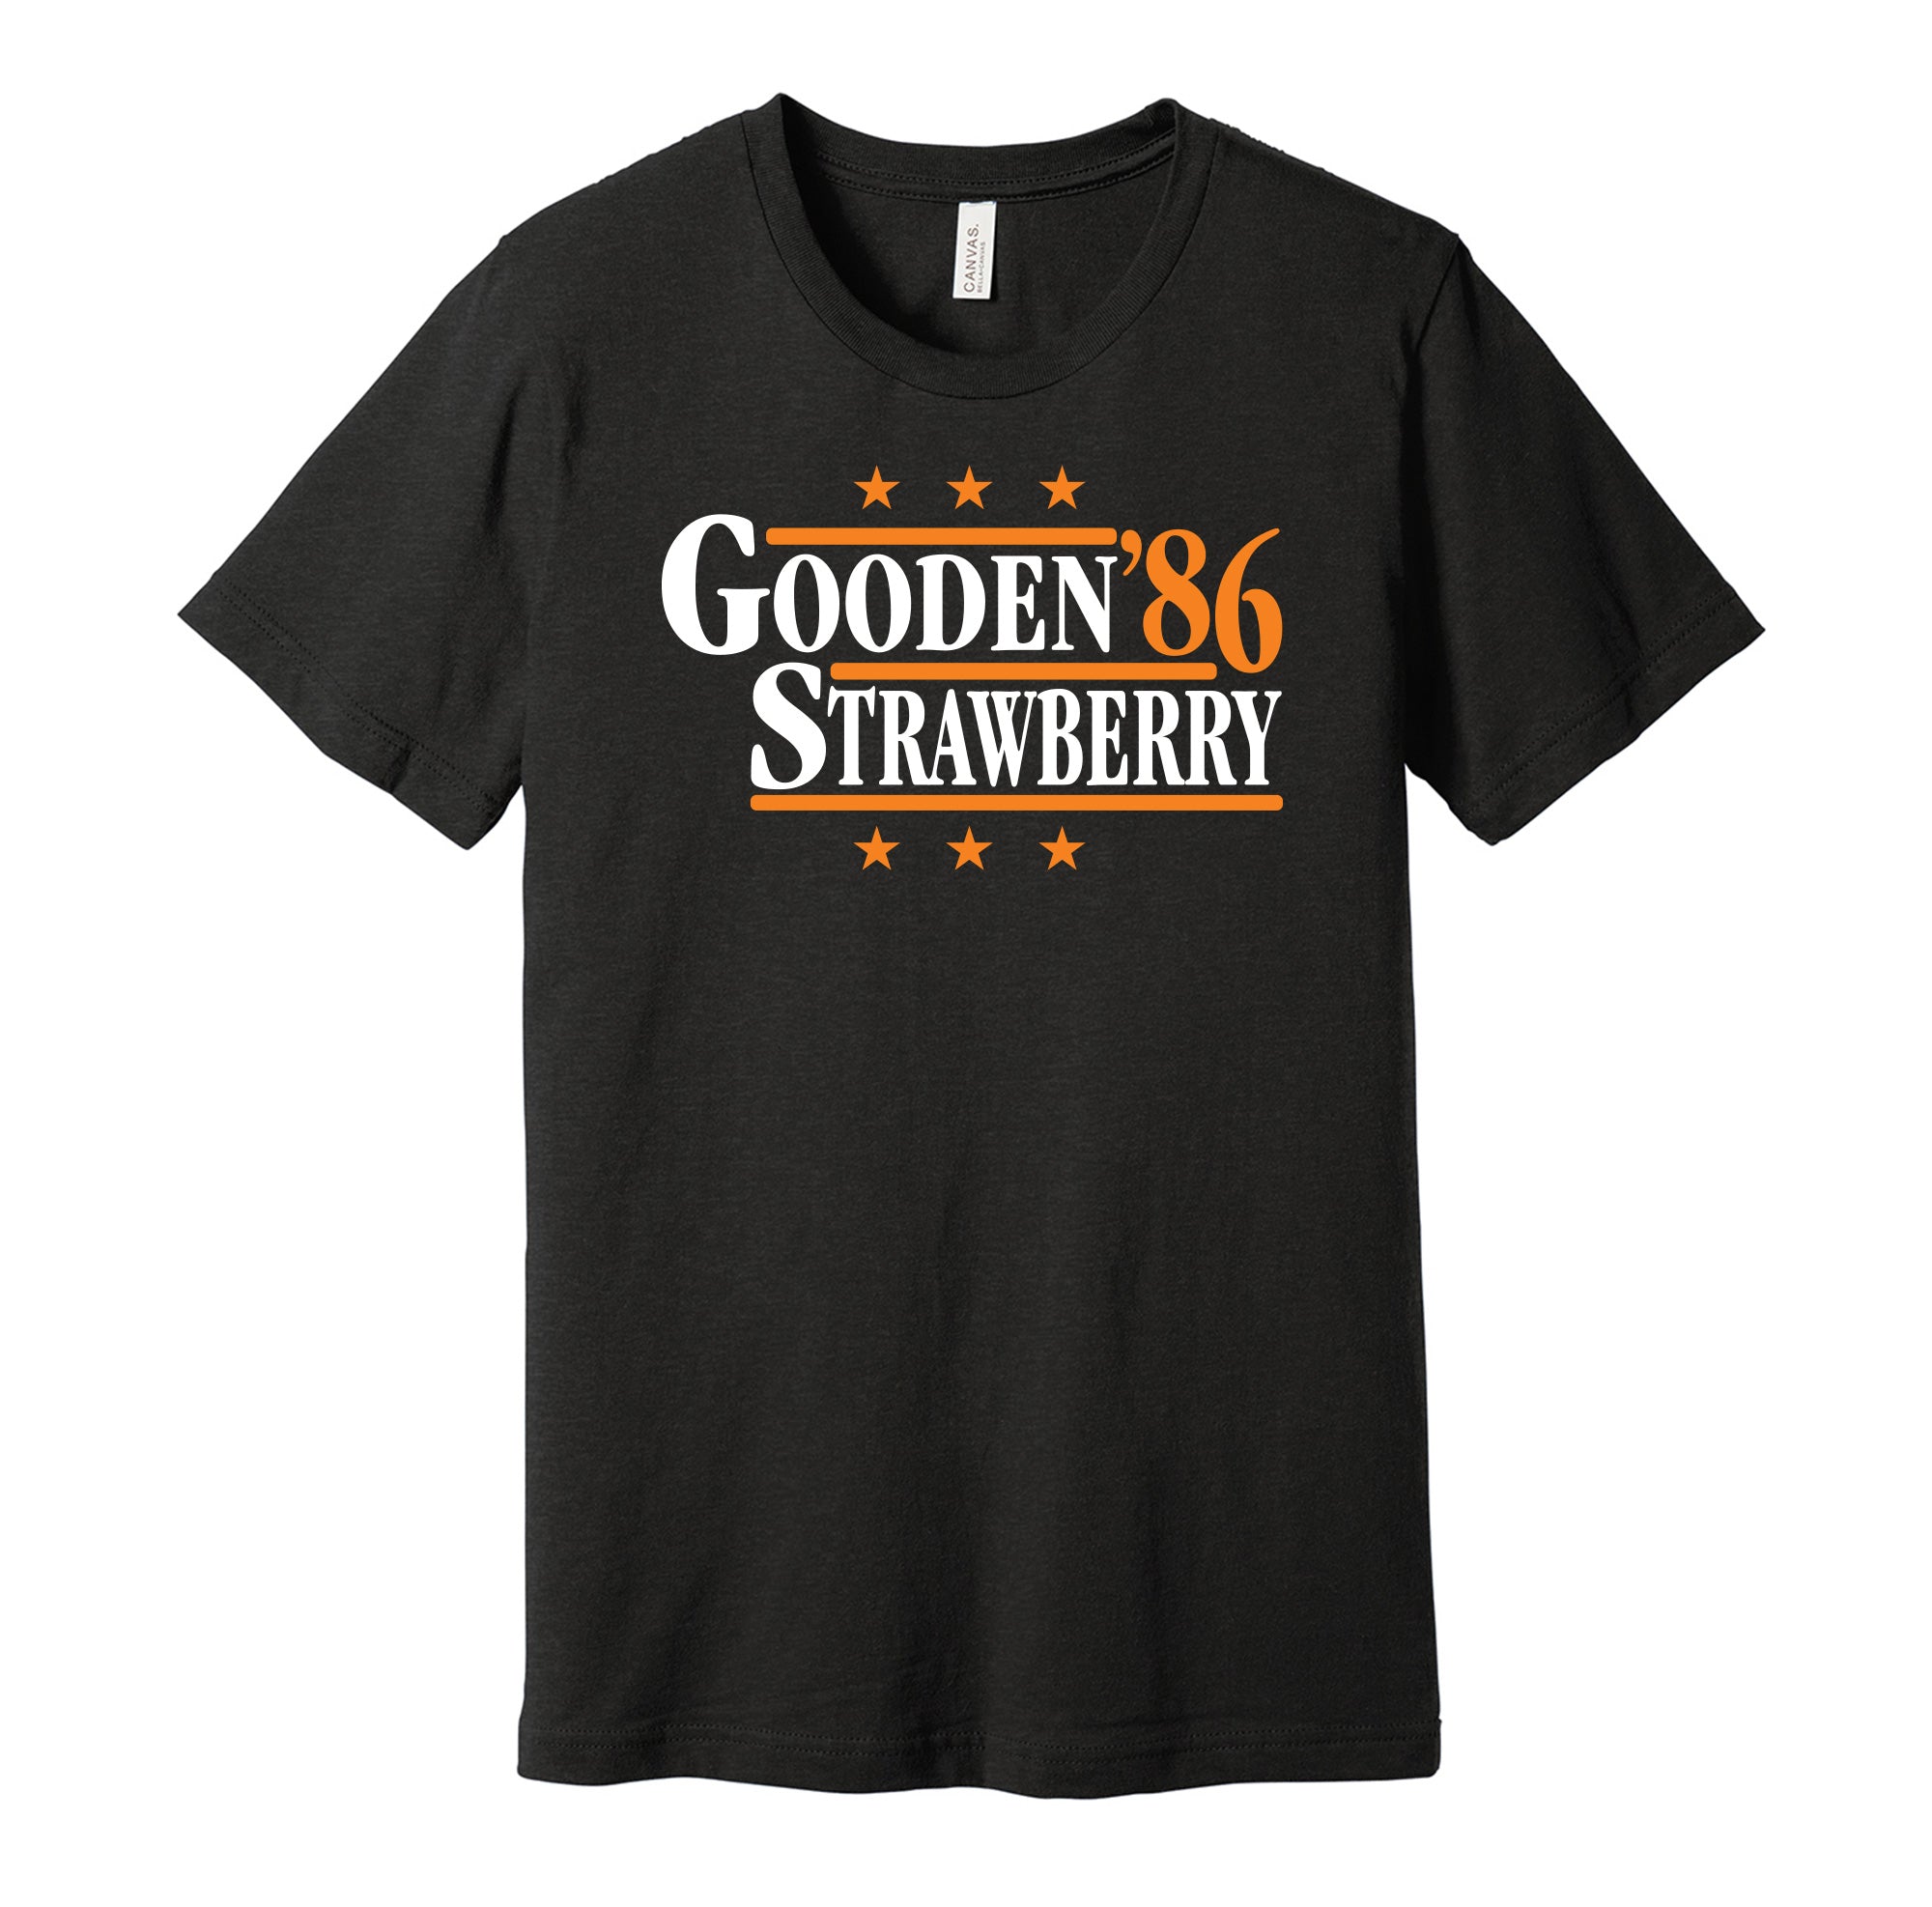 Geny Mets Report What's Good Pham t-shirt by To-Tee Clothing - Issuu